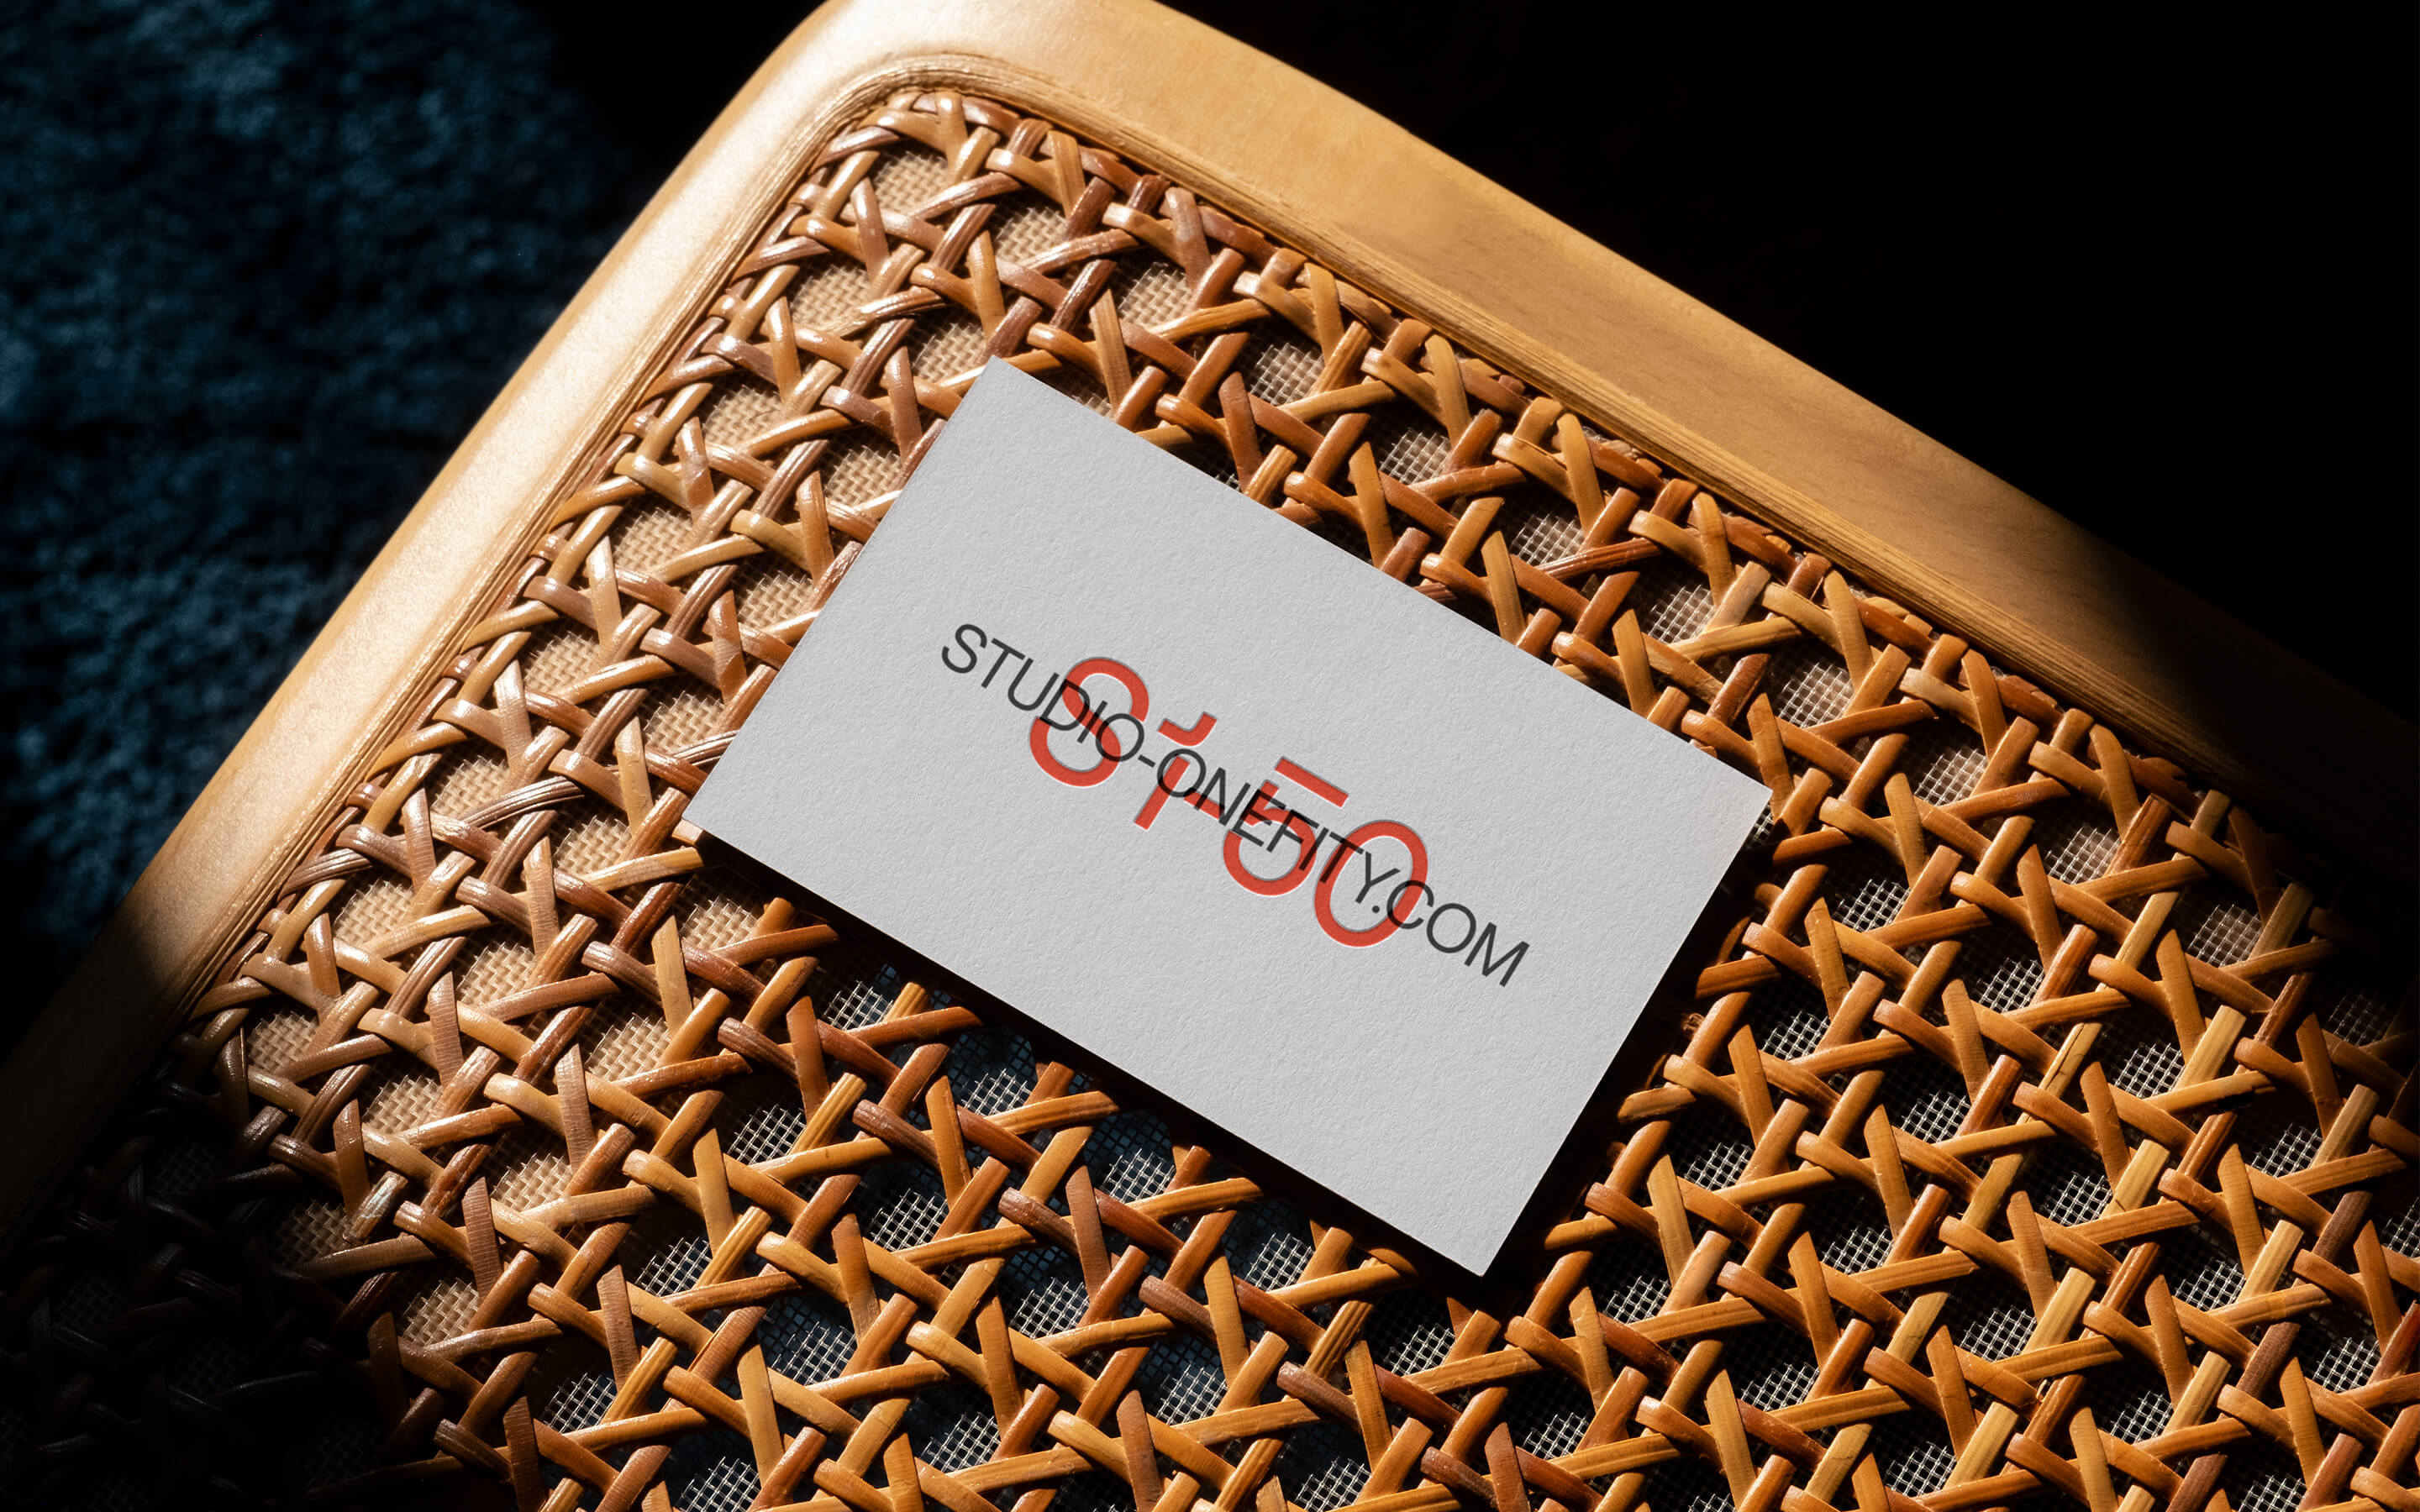 Studio One-Fifty business card